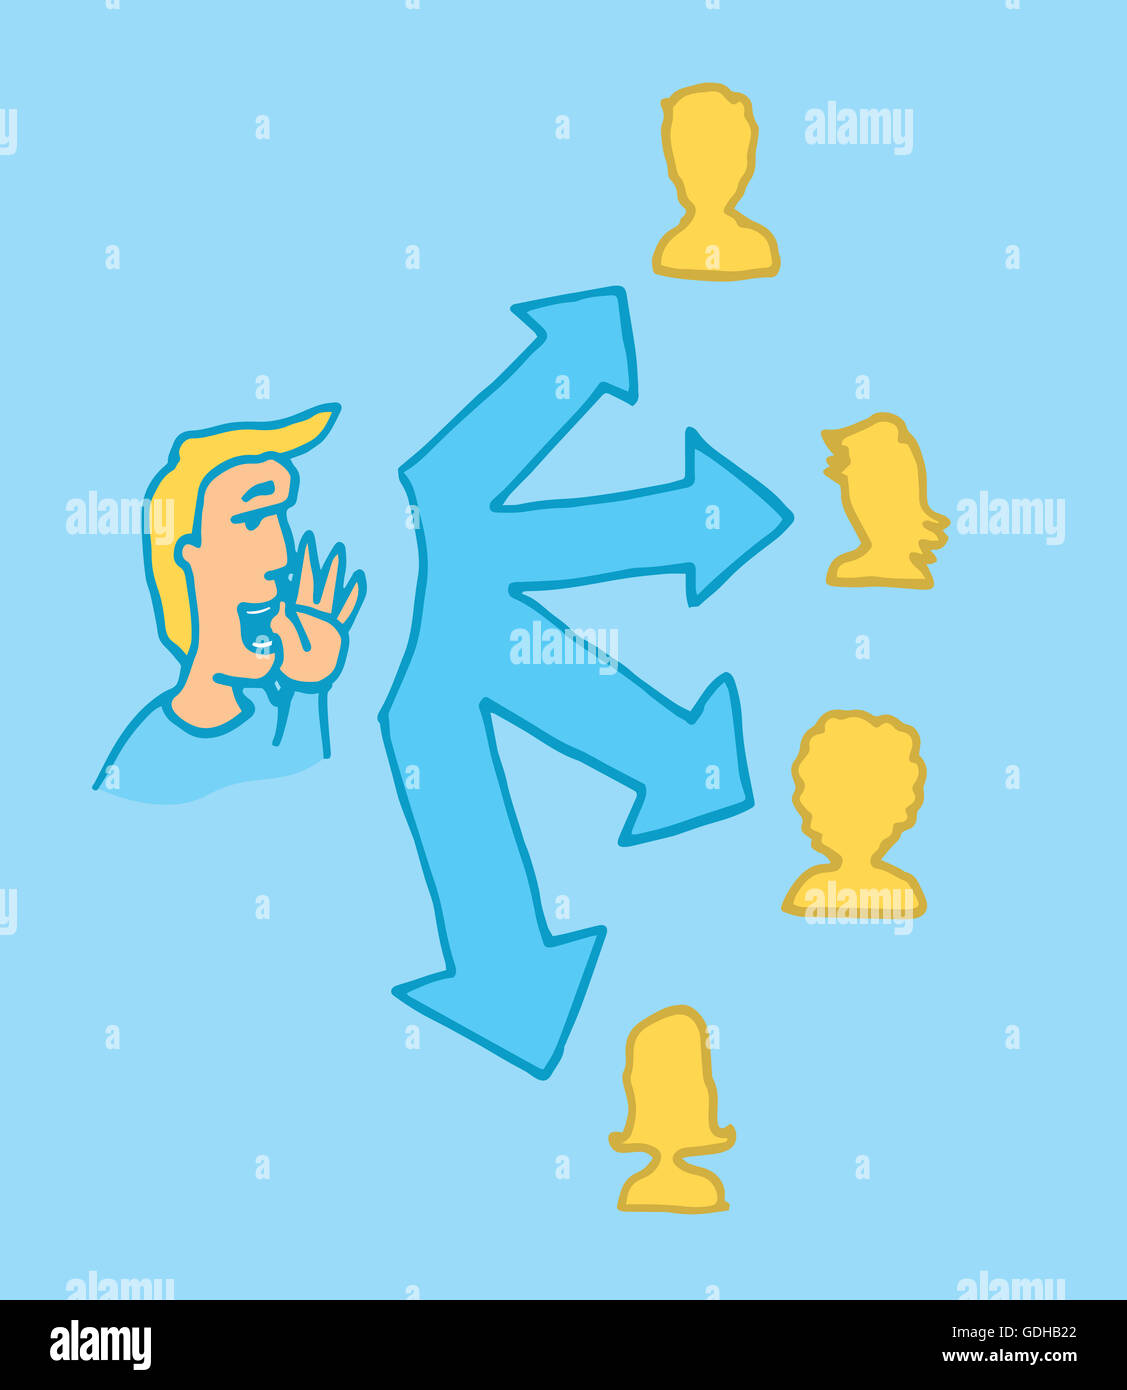 Cartoon illustration of a person sharing a social media message with four friends Stock Photo